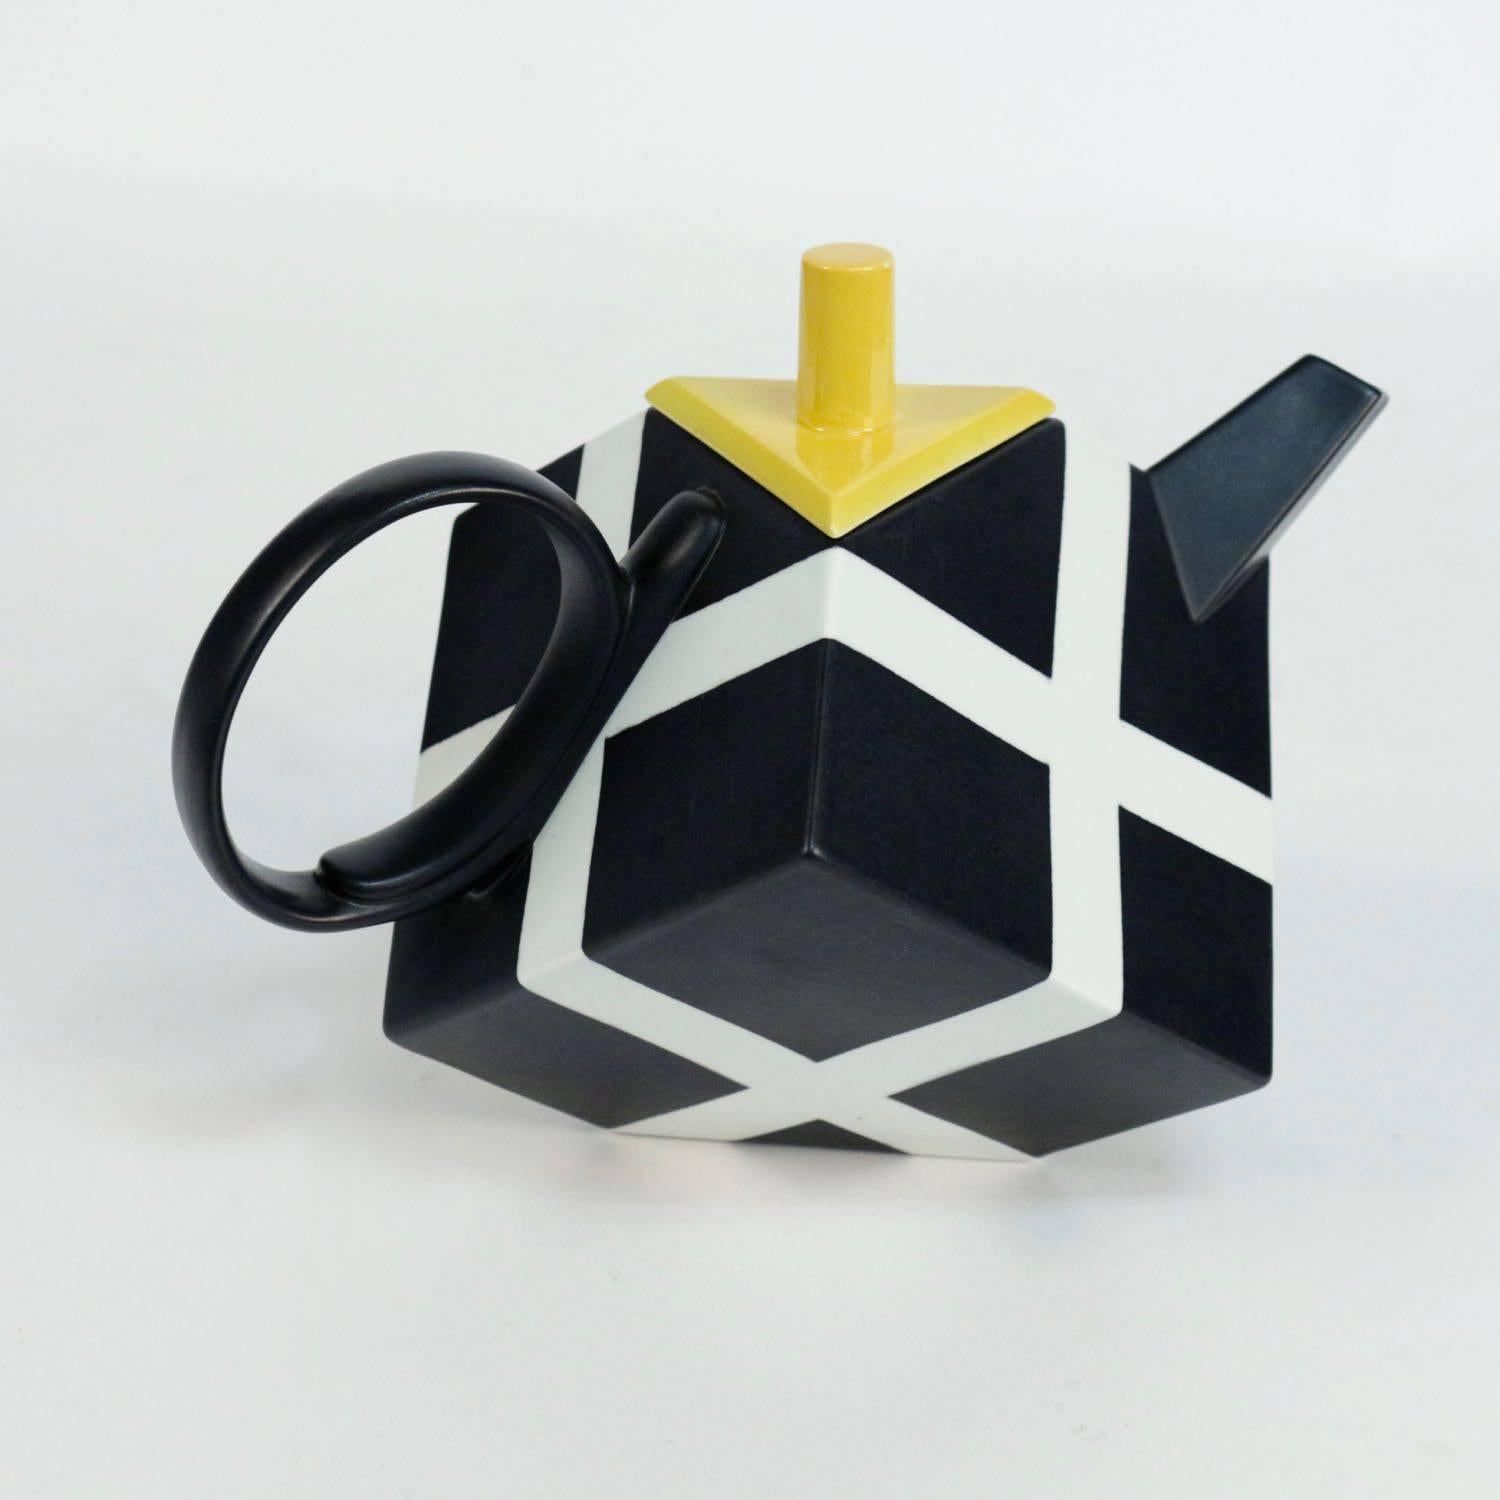 Porcelain tea pot by Rolf Sinnemark for Rörstrand manufacturer. 

Porcelain tea pot and lid with geometric decoration in black and white.
The yellow tea pot cover consists of a cylindrical knob on a flat triangular lid.
Single handle and upward